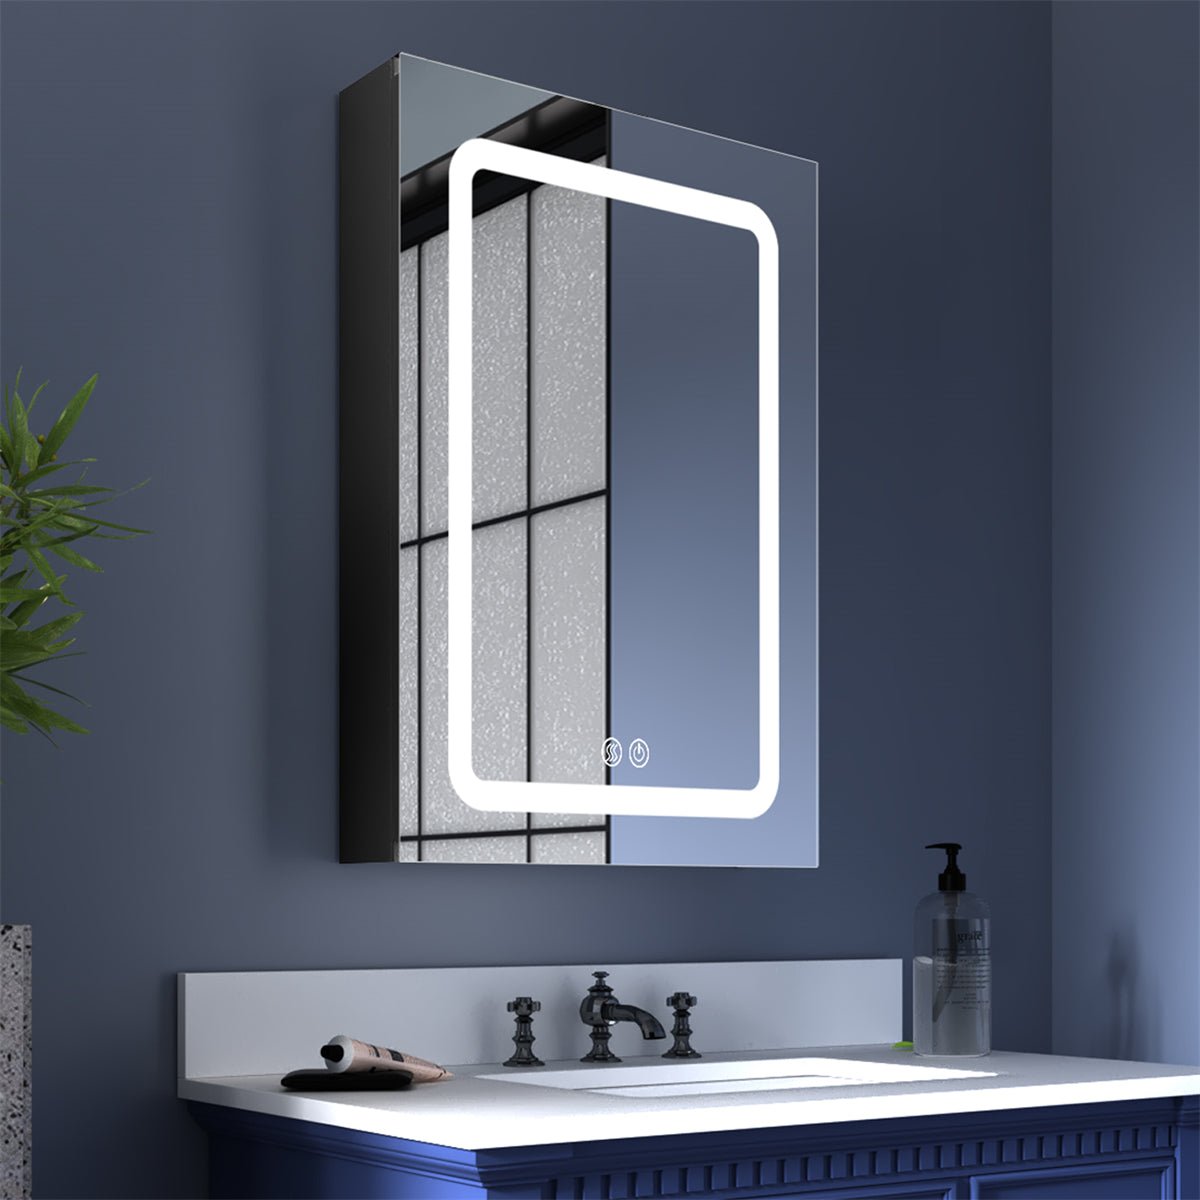 ExBrite 20 in. W x 30 in. H LED Bathroom Medicine Cabinet Surface Mounted Cabinets with Lighted Mirror Right Open